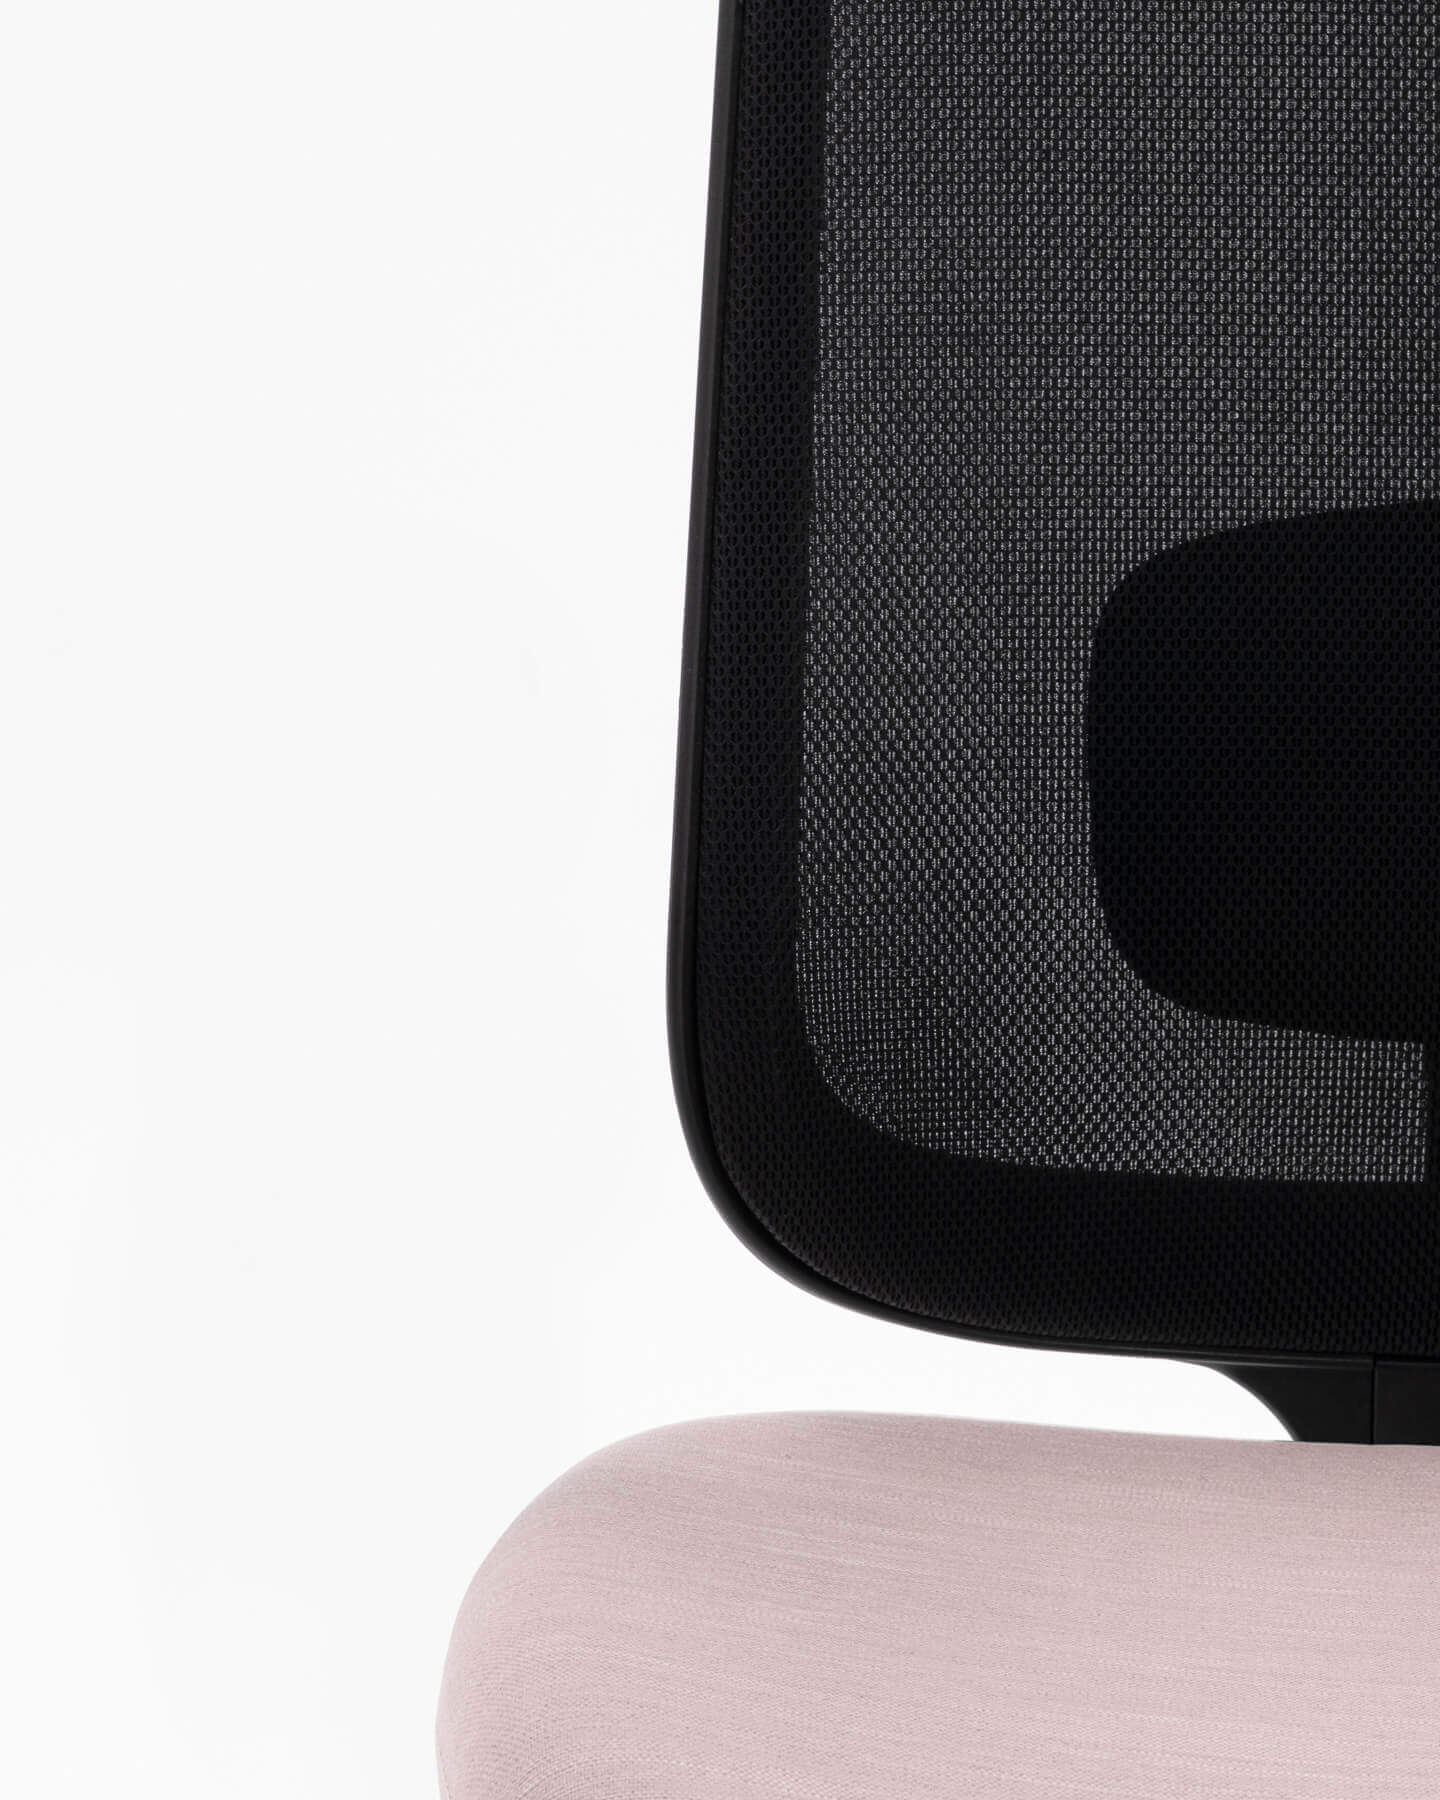 A Close Up Shot Of An Armless Task One Black Frame Office Chair And Pink Seat